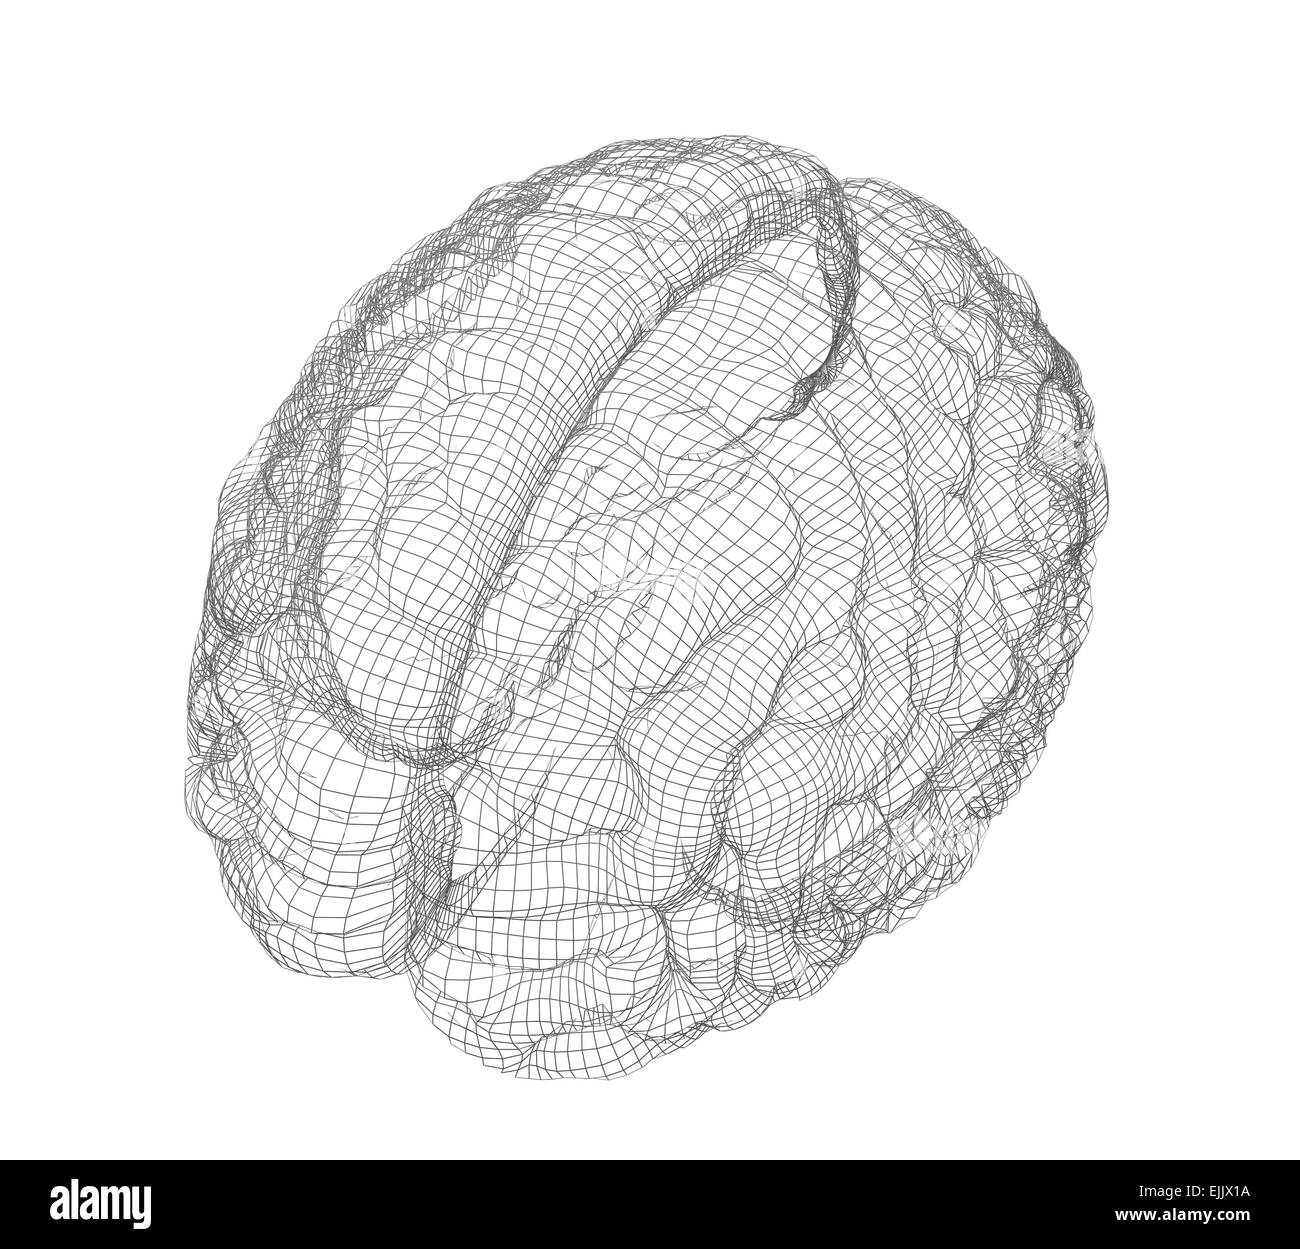 Wire-frame of brain with occipital region Stock Photo